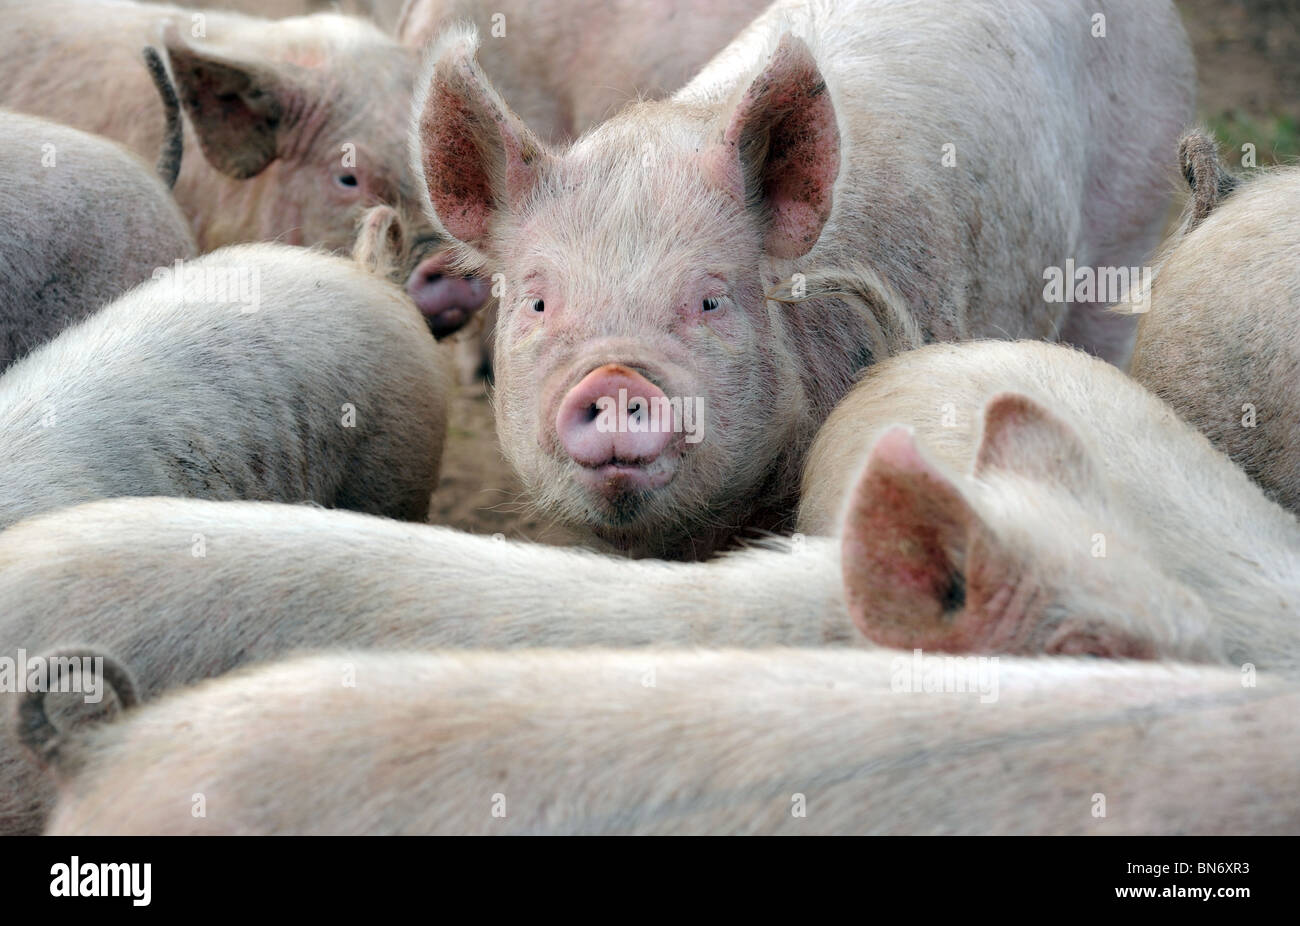 YOUNG PIGS AND PIGLETS AT A BRITISH FARM RE FARMING INCOMES FOOD PRICES SUPERMARKETS ANIMAL WELFARE PRODUCTION COSTS MEAT UK Stock Photo